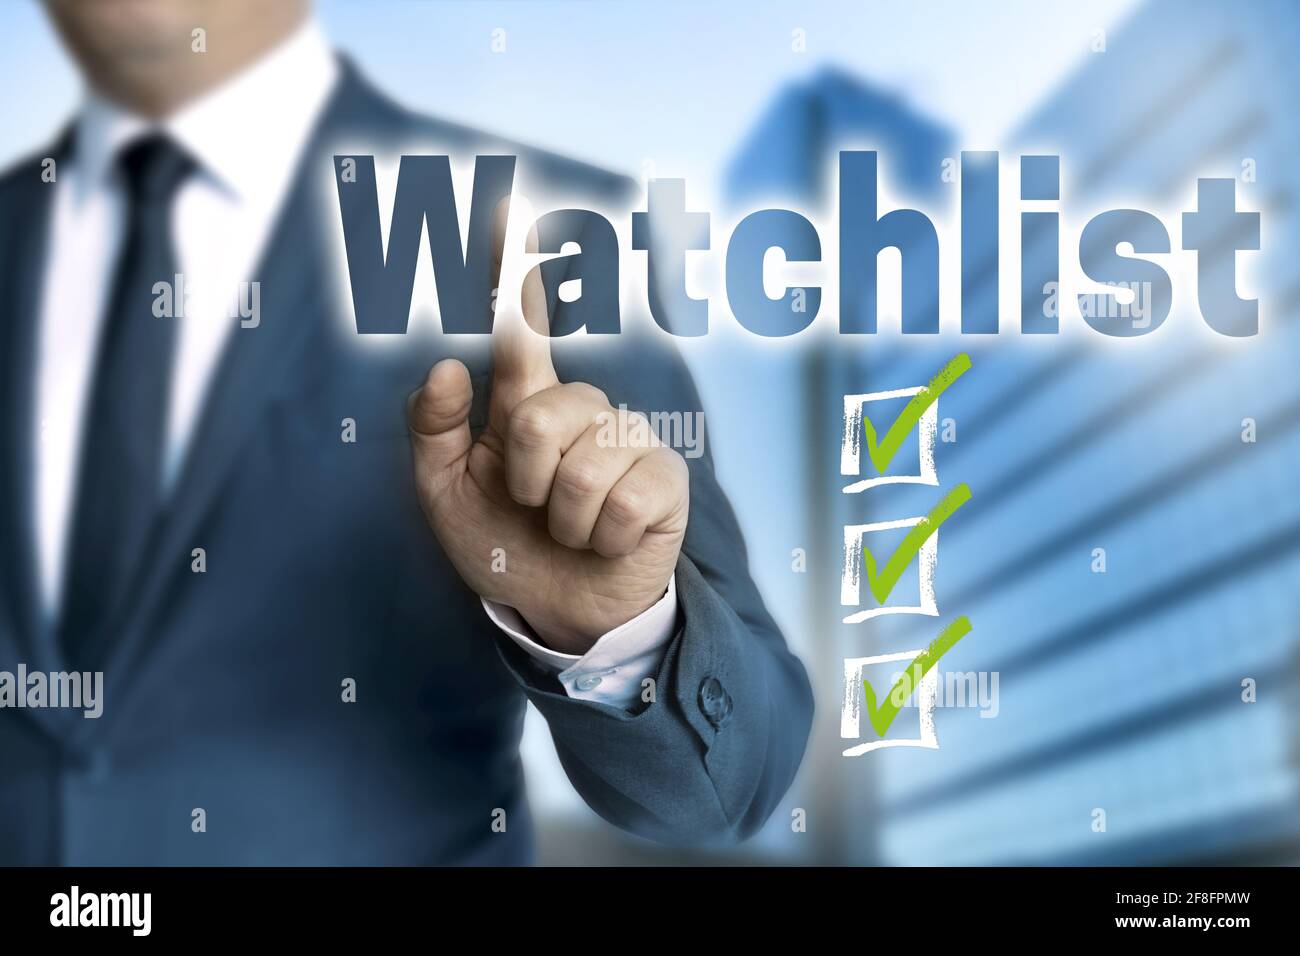 Watchlist concept is shown by businessman. Stock Photo